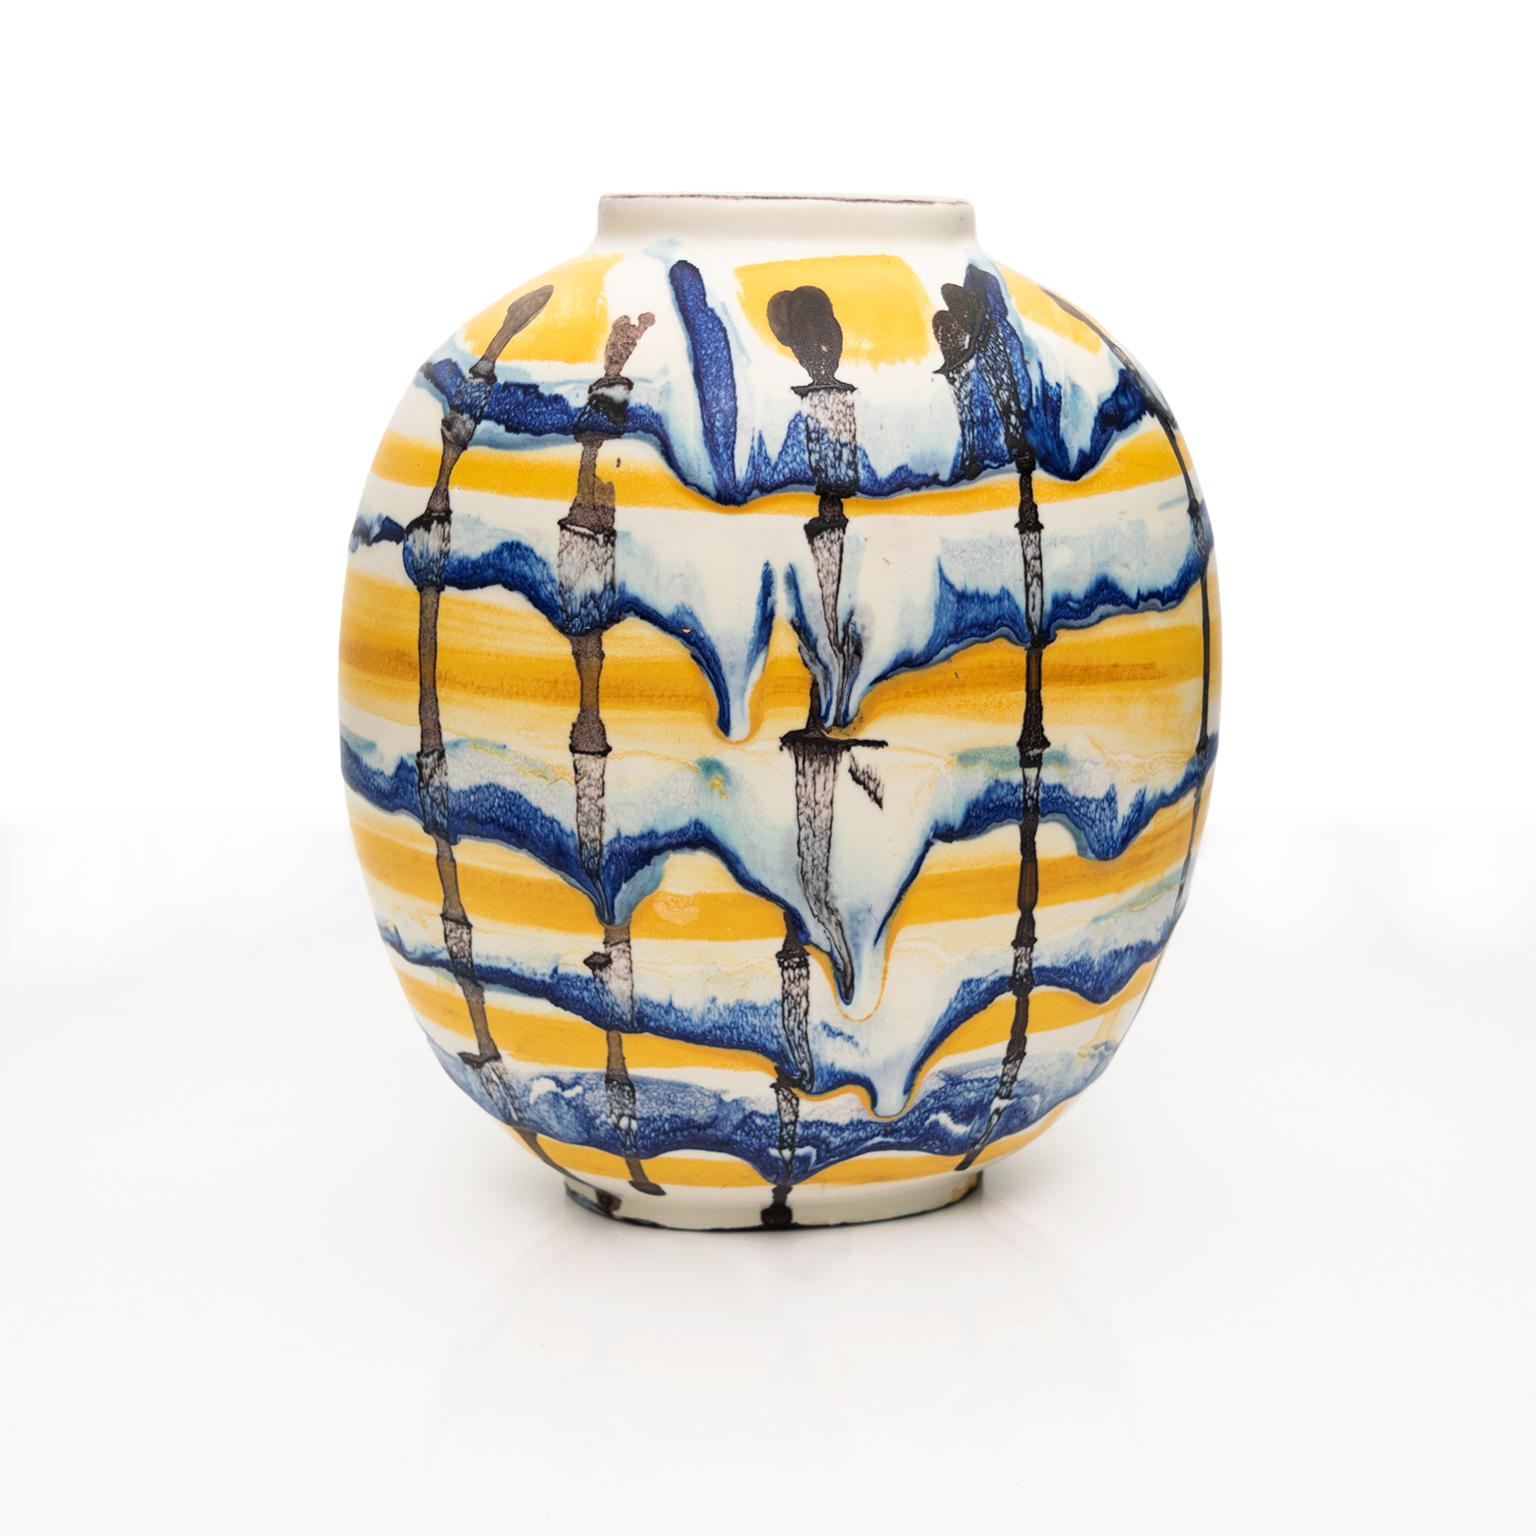 A hand decorated glazed vase by artist Carl-Harry Stalhane for Rorstrand, Sweden. The vase has a loose grid pattern with blue, yellow and dark brown/black on a white ground. Signed and dated on the bottom “43”. 

Measures: Height 9.5”, width 8”,